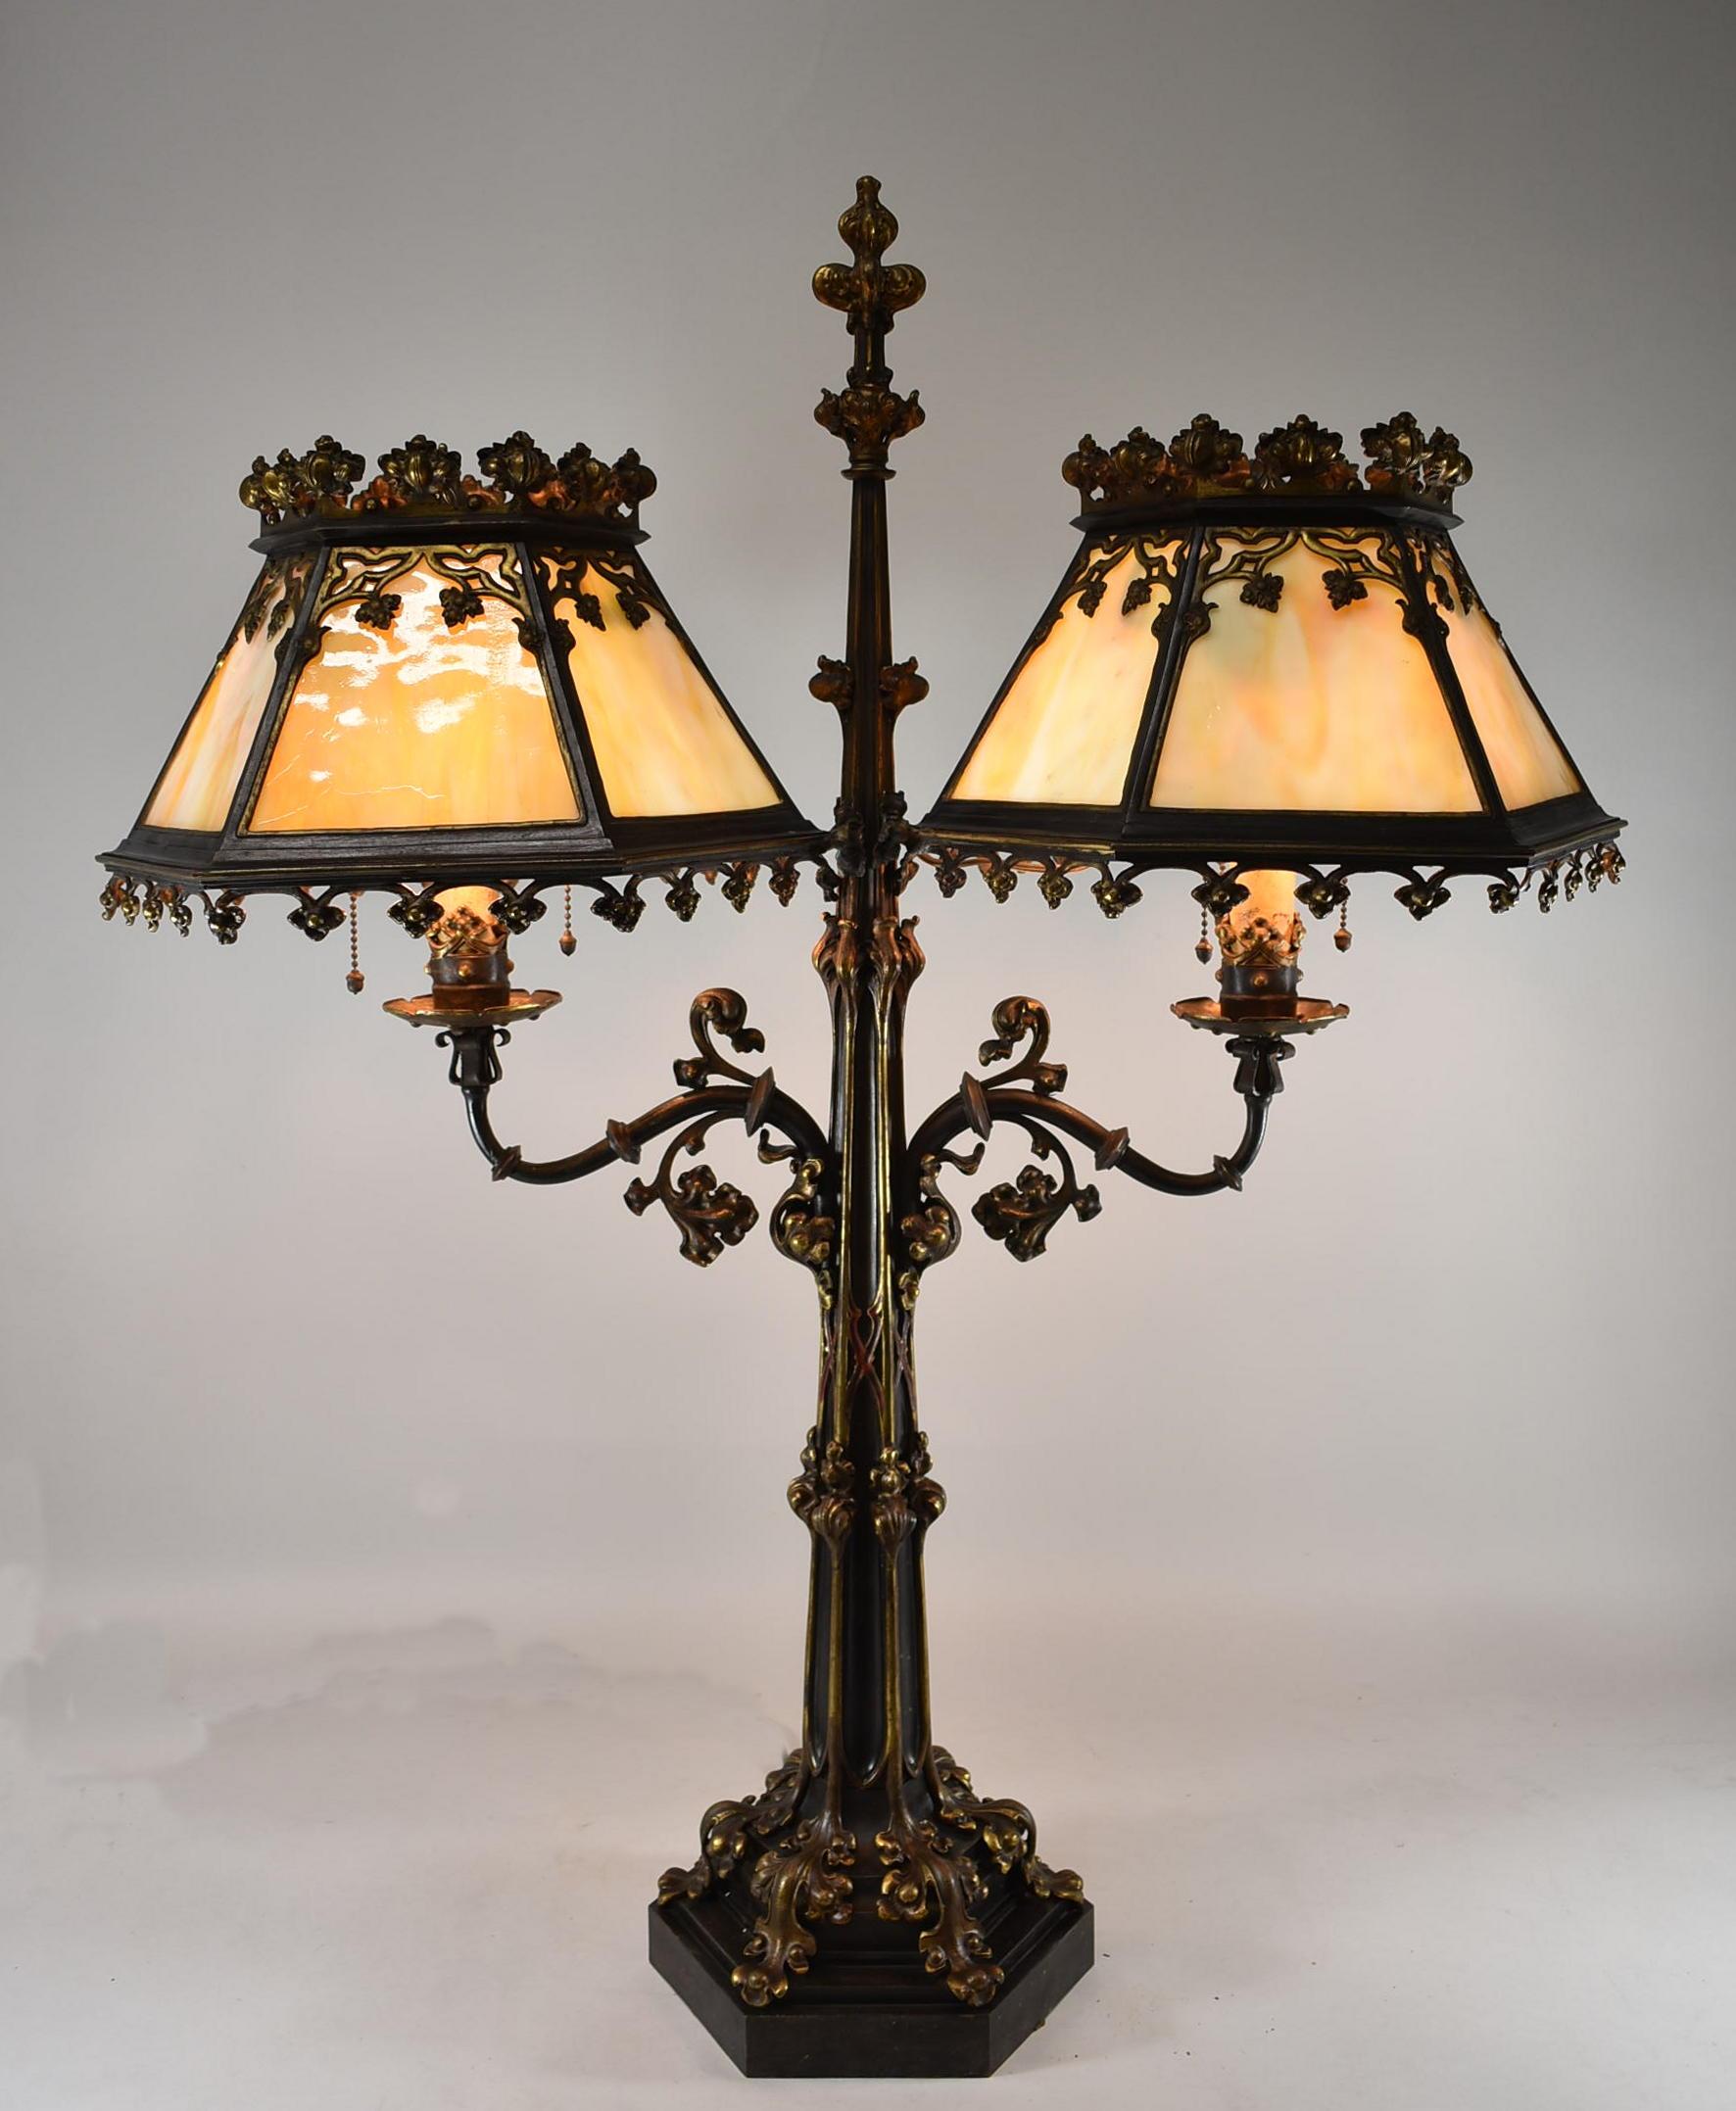 Antique bronze Gothic Revival double amber slag glass shaded library table lamp. Three sockets each side with acorn pull chains. No cracks in the glass. Heavy with intricate detailing. Has been rewired.